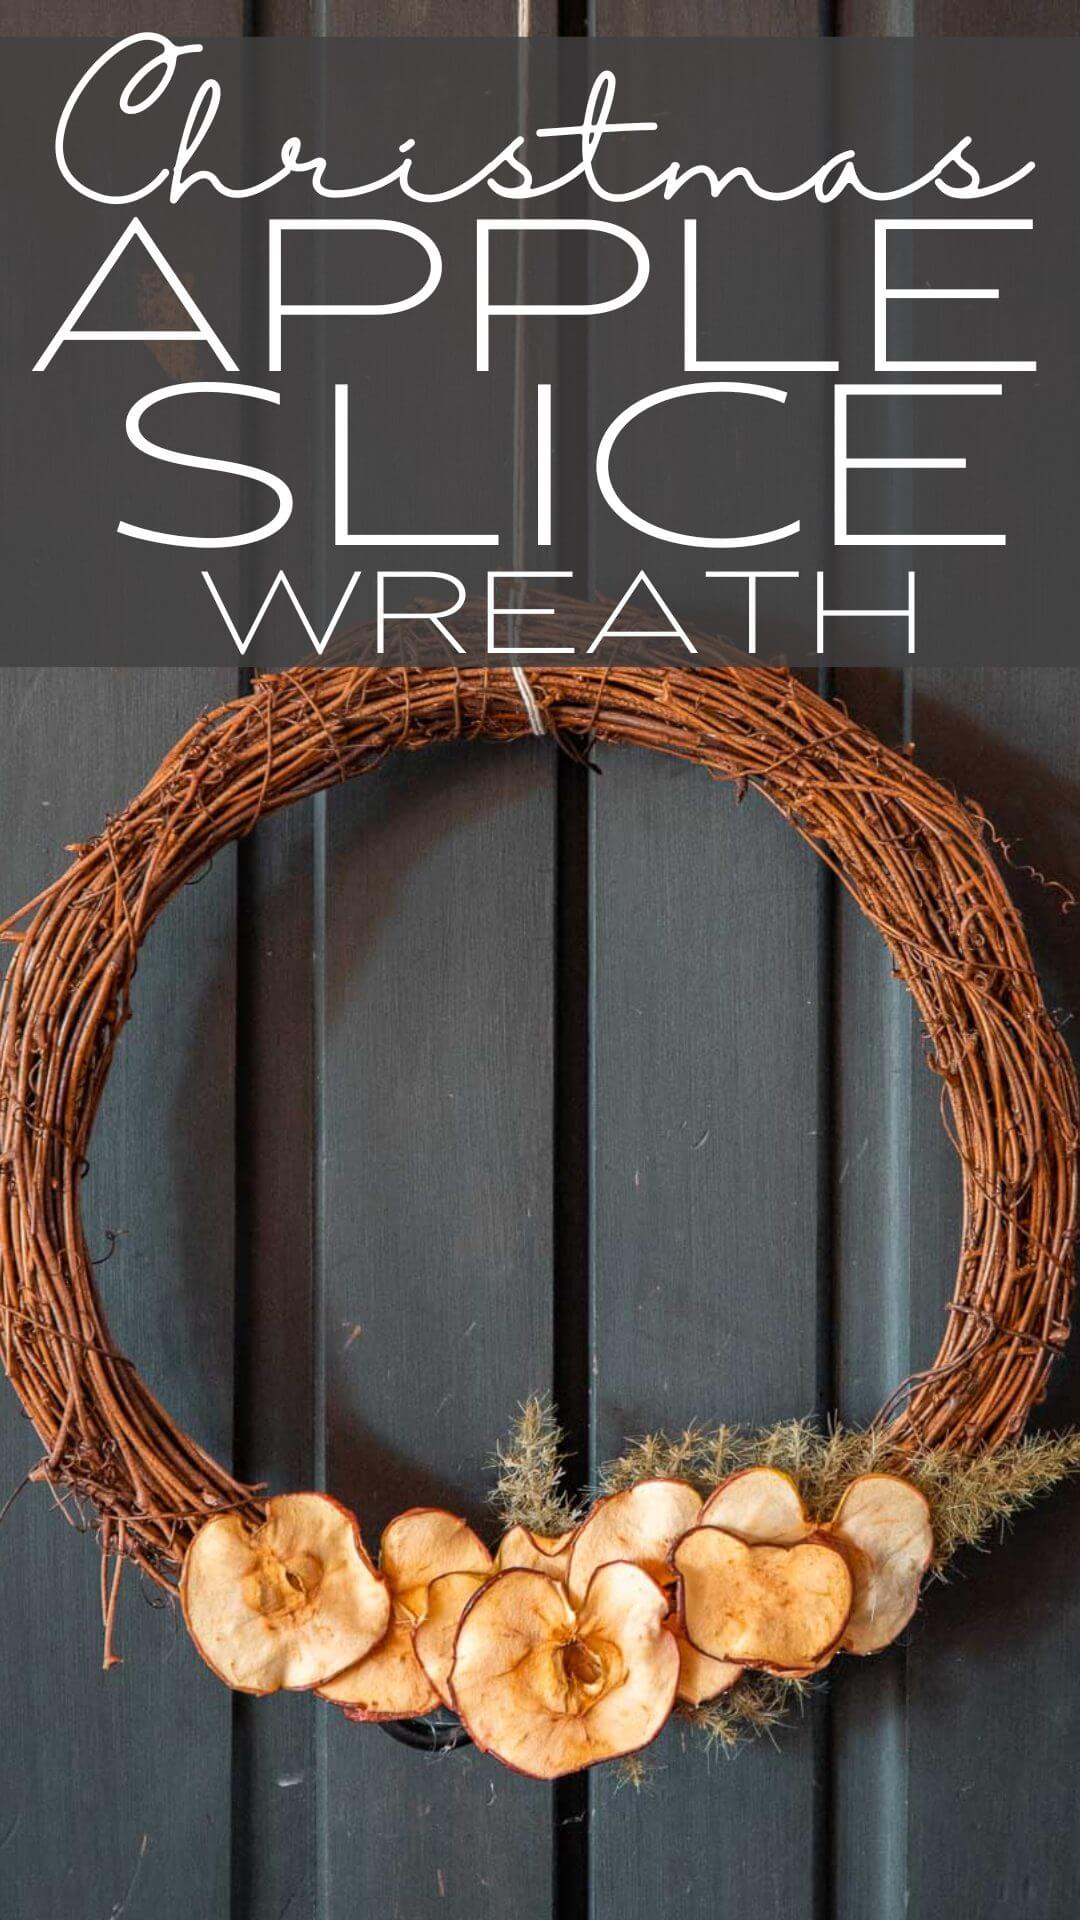 How to make an easy apple wreath for your Christmas decor! This pretty organic Christmas decor is perfect and costs little to make.